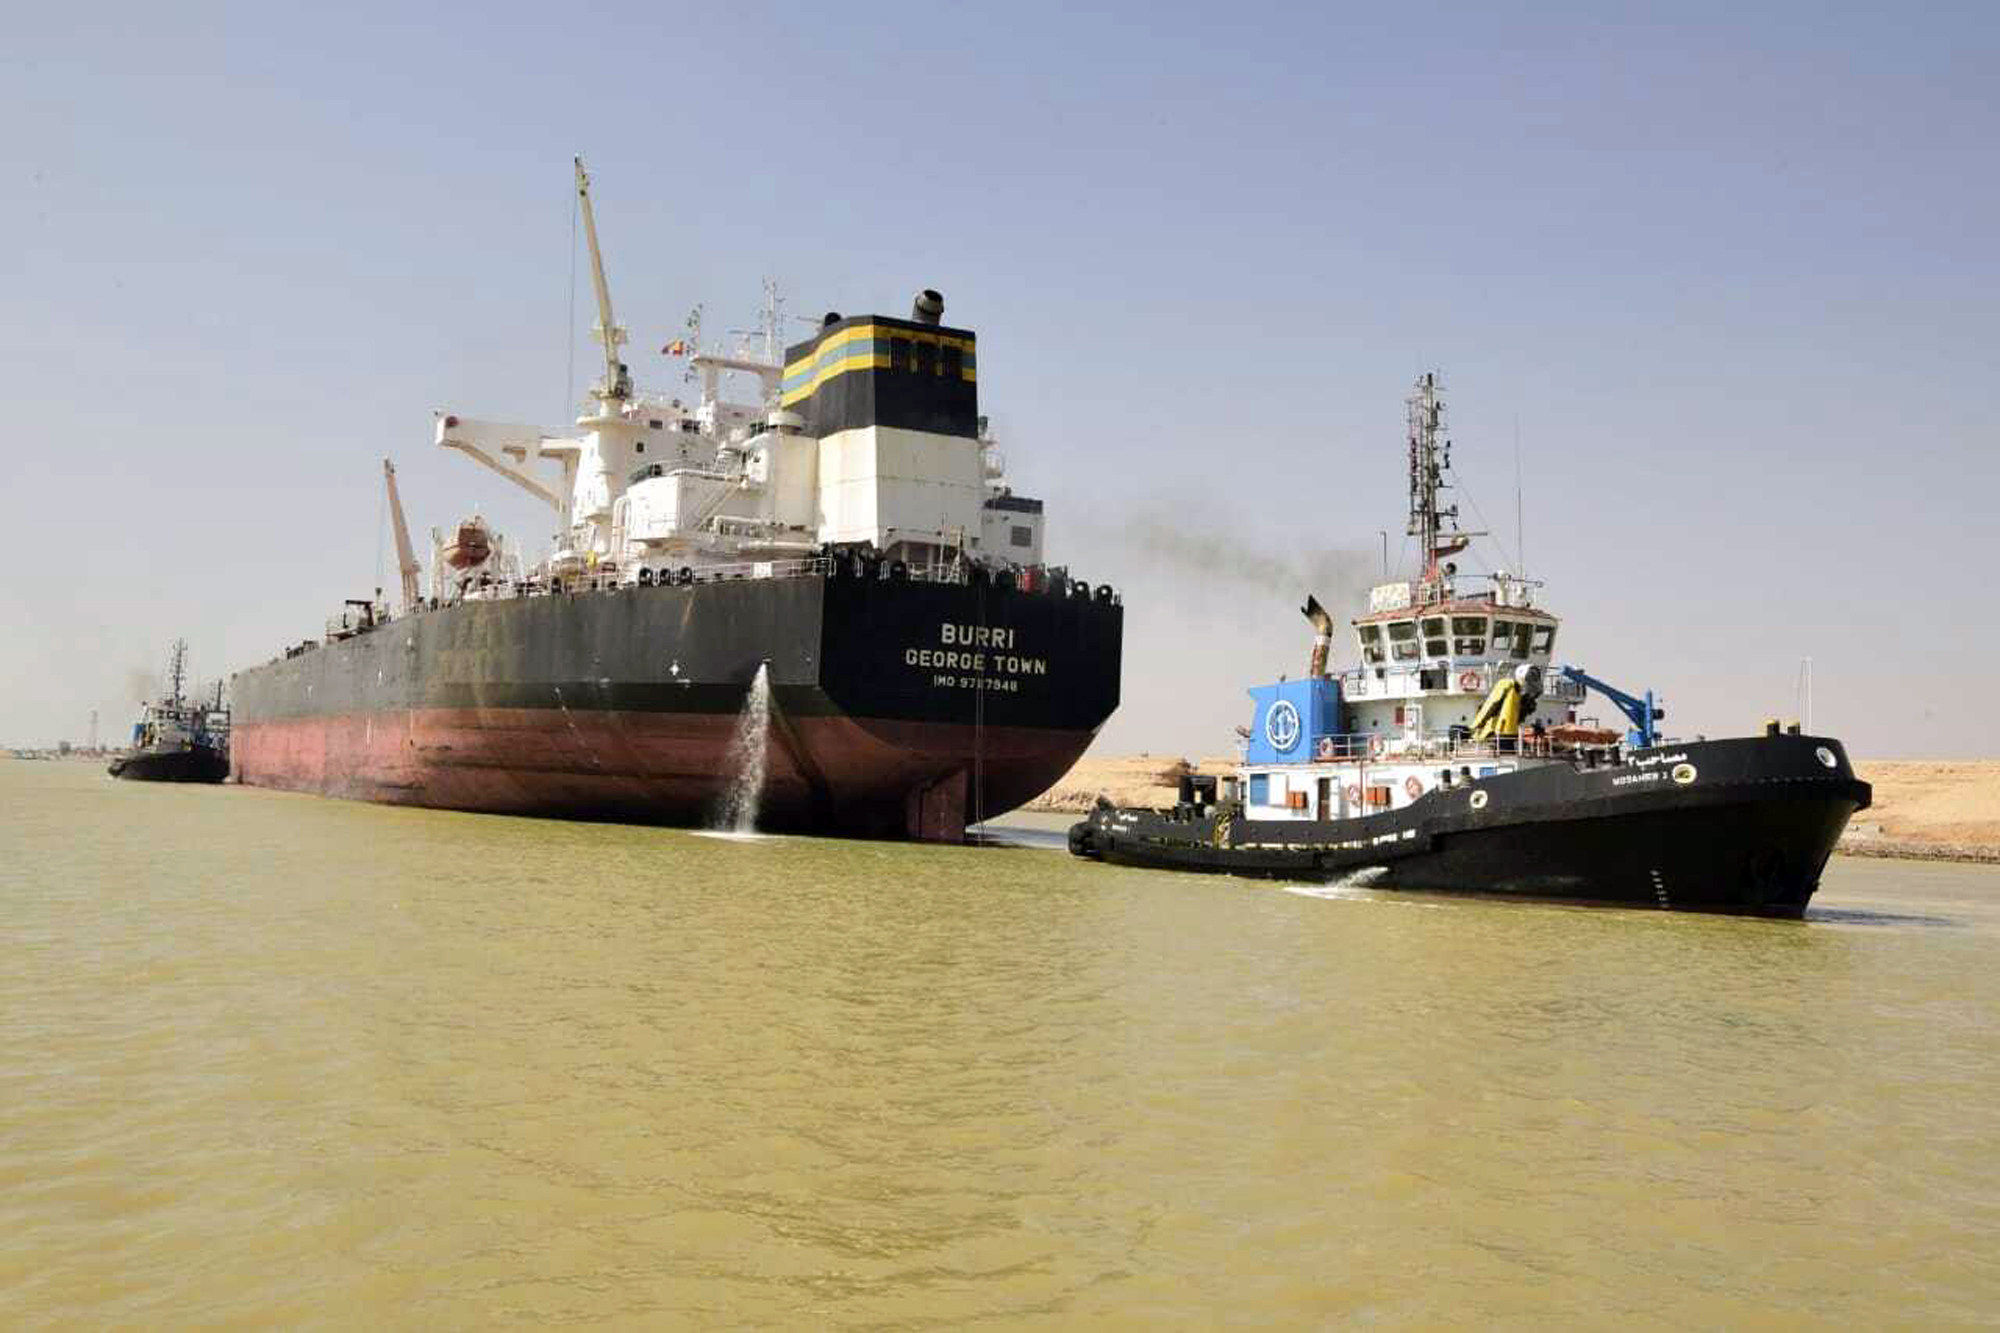 The Burri being towed away in the Suez Canal after a collision with Singapore-flagged tanker BW Lesmes. Photo: Suez Canal Authority via AP